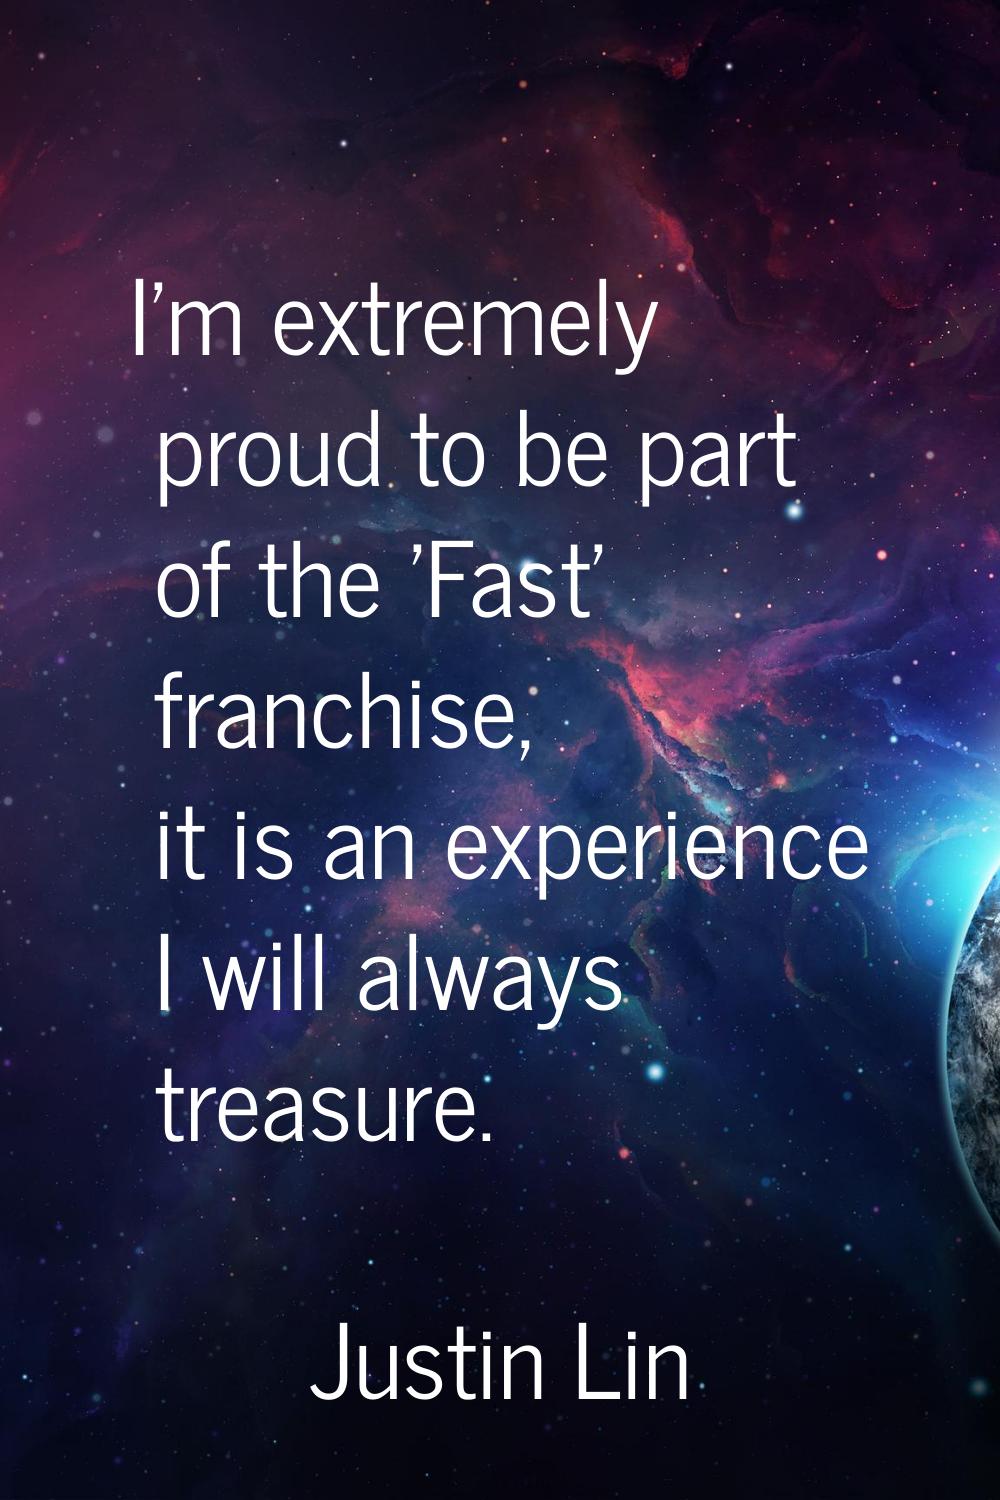 I'm extremely proud to be part of the 'Fast' franchise, it is an experience I will always treasure.